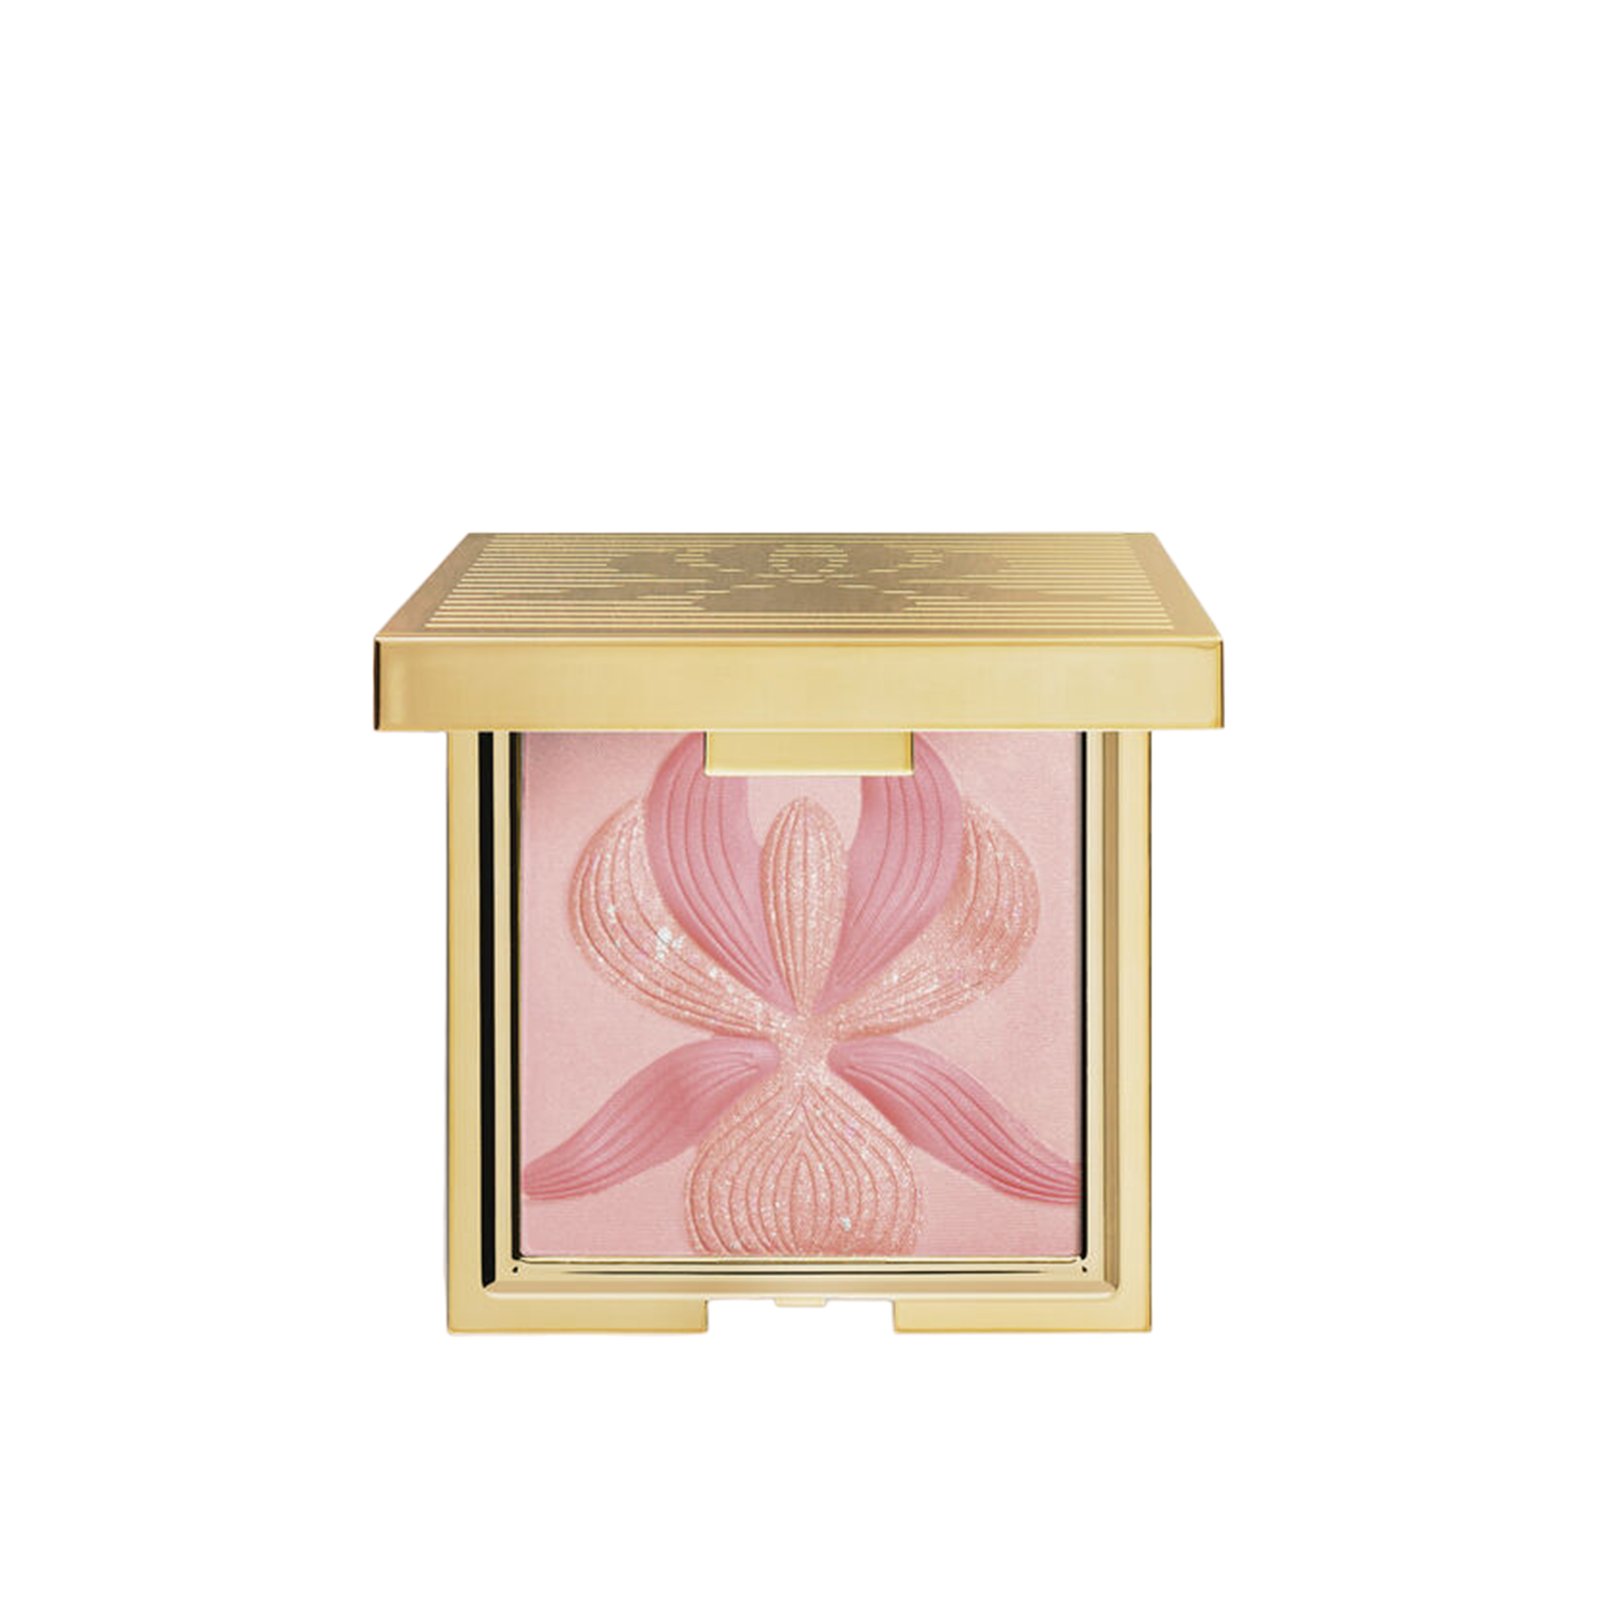 Sisley Paris Highlighter Blush With White Lily L'Orchidée Rose 15g (0.52 oz)